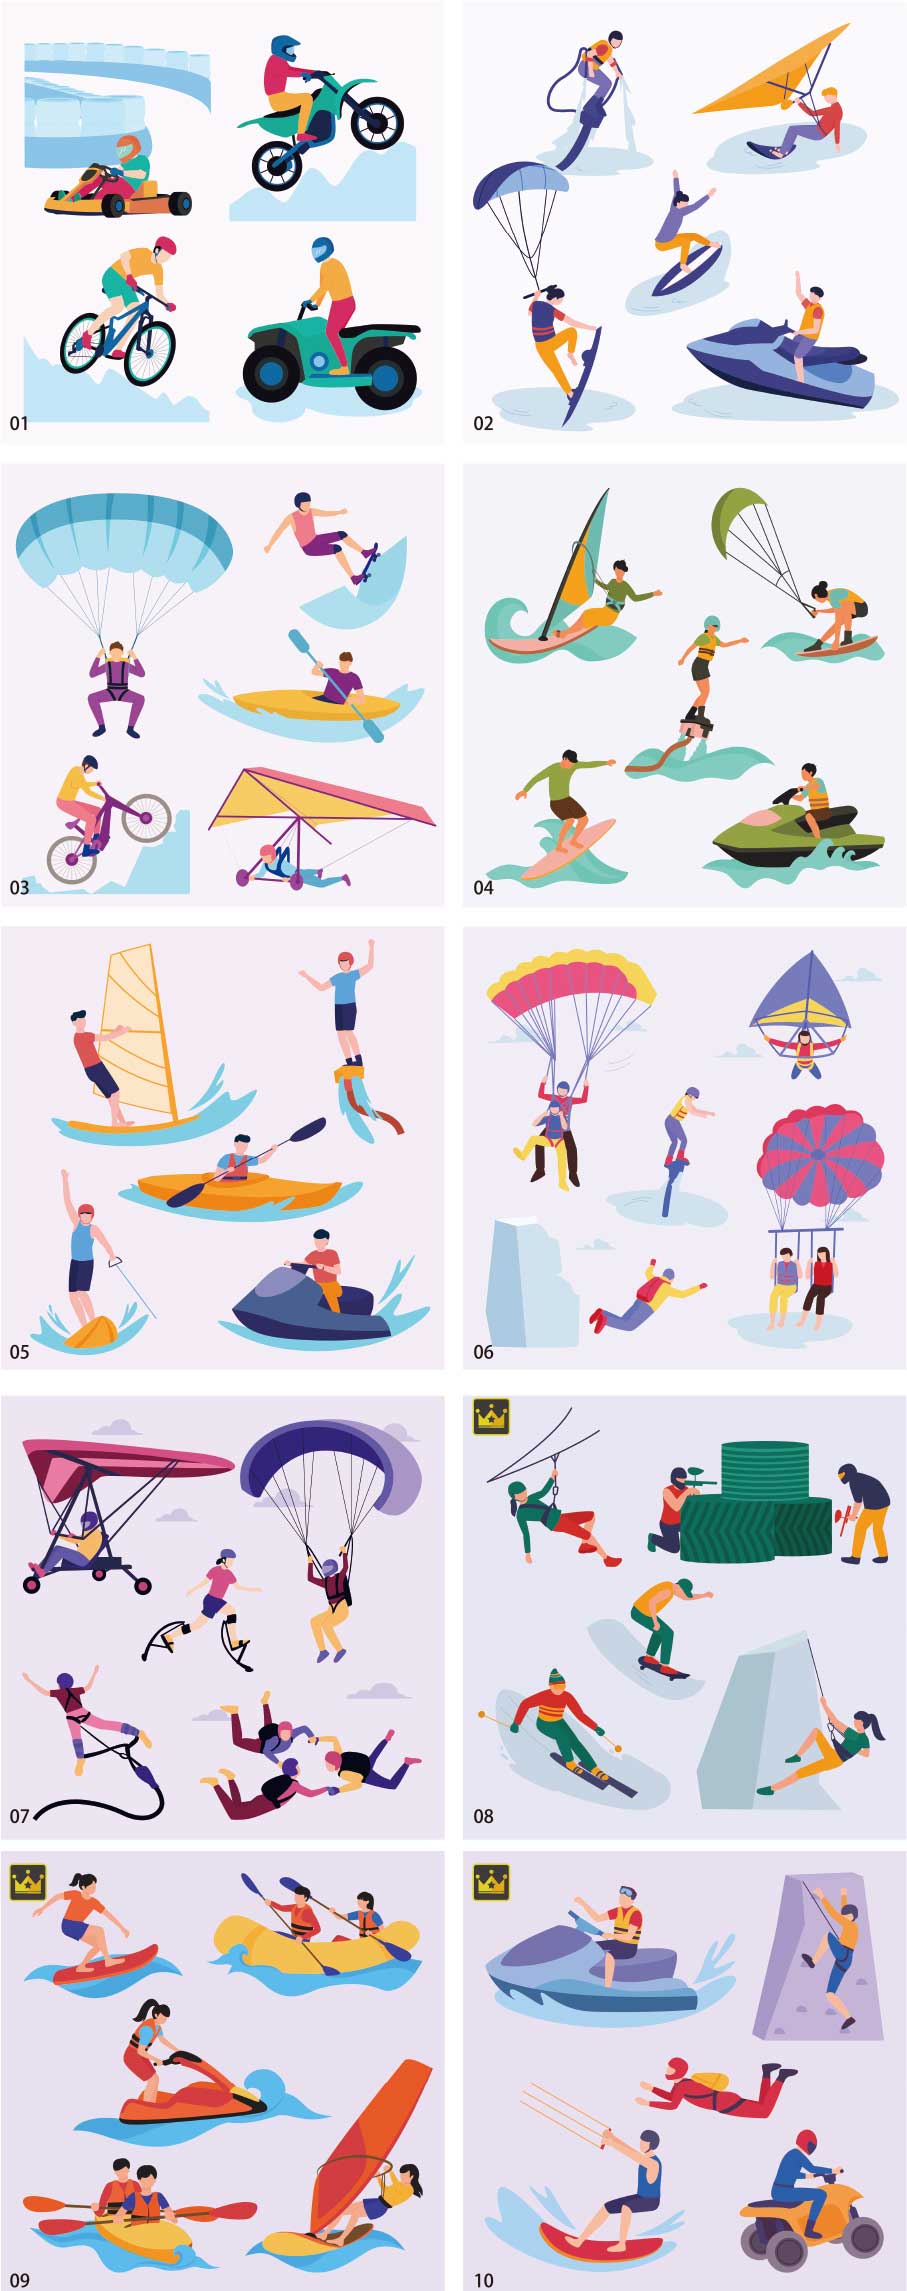 Extreme sports illustration collection